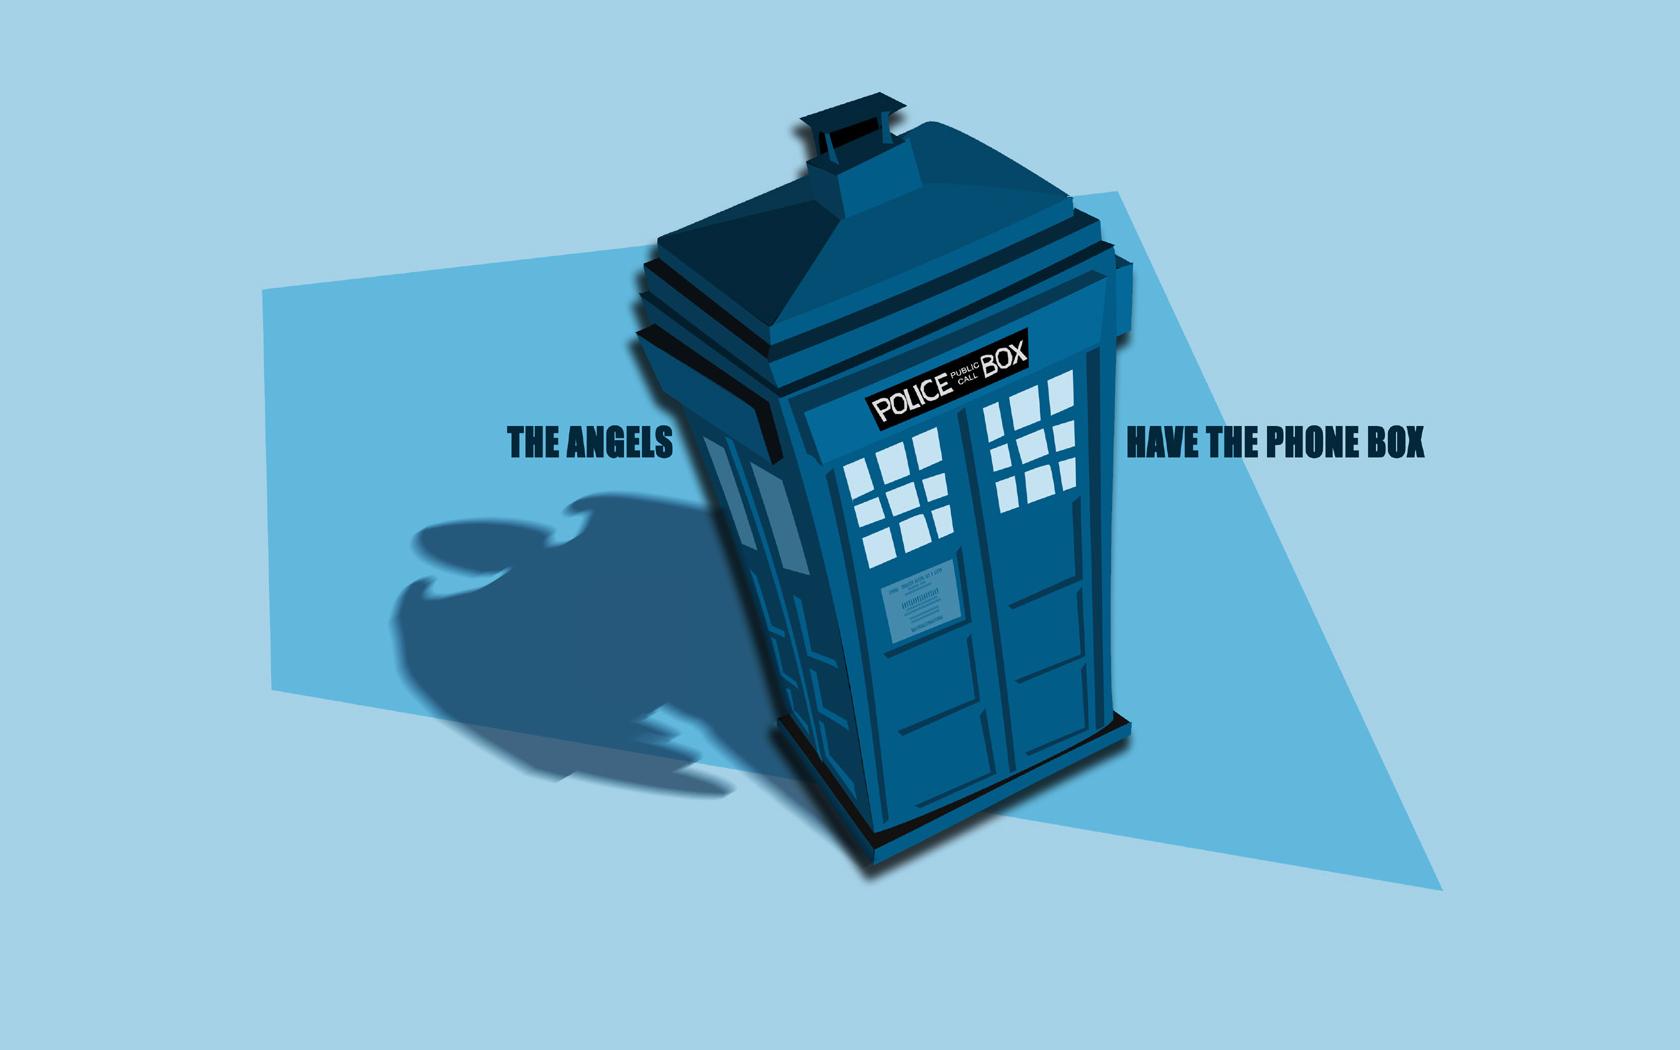 doctor who, tv show, tardis High Definition image